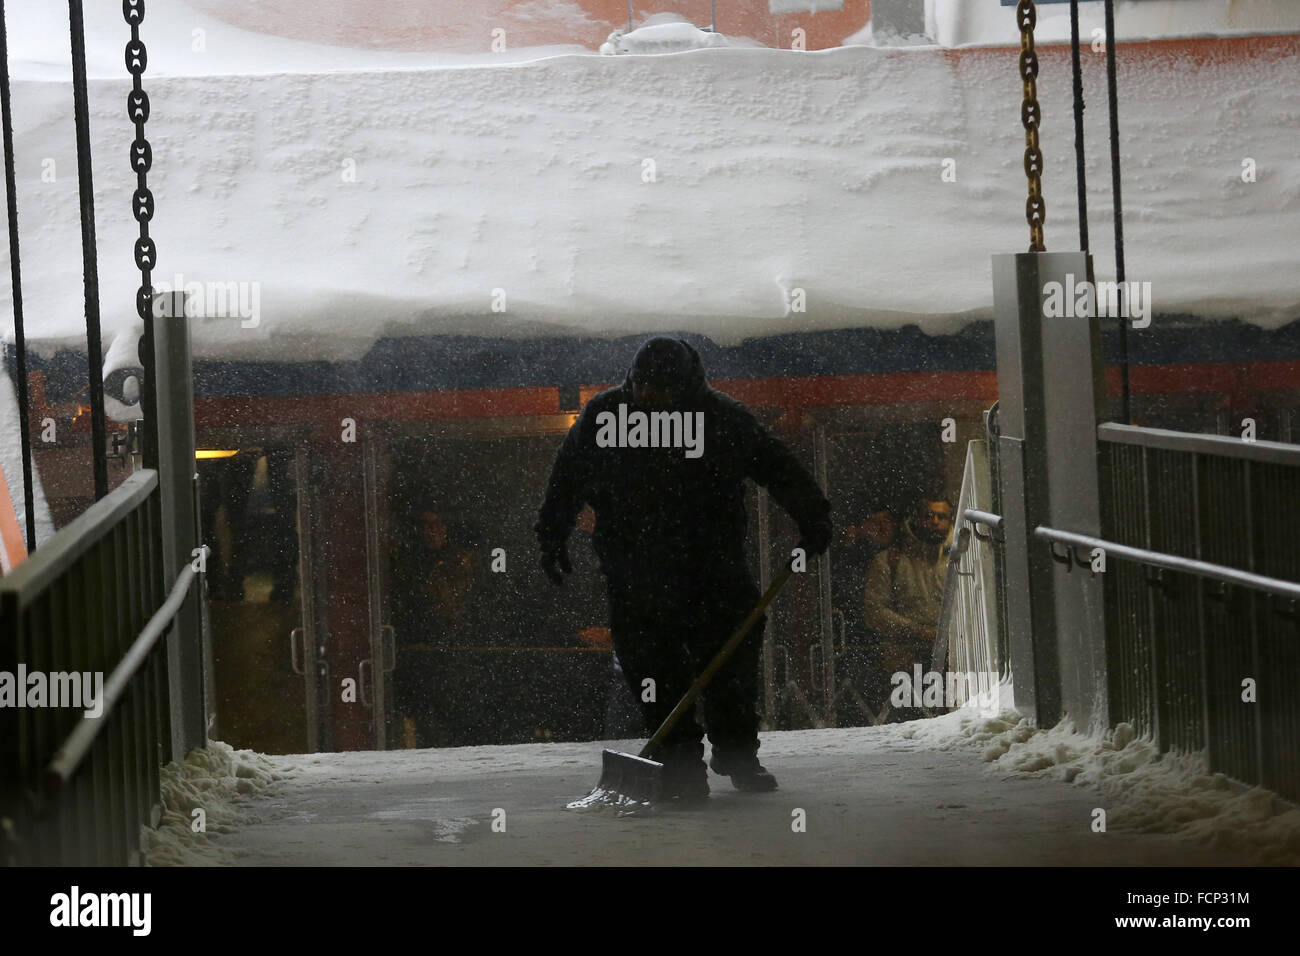 New York, New York, USA. 23rd Jan, 2016. A DOT employee removes snow off of the ramp before passengers depart the Staten Island Ferry in St. George terminal during Winter Storm Jonas. A travel ban had been in place for hours, but the ferry still operated. Snowfall projections for Staten Island were approximately 12-18in, with winds gusting up to 50 miles an hour. Late afternoon, buses ceased to run and a travel ban was enforced by the NYPD. This lack of transportation stranded many residents of Staten Island who had taken the ferry home. People were forced to try and walk to their destination Stock Photo